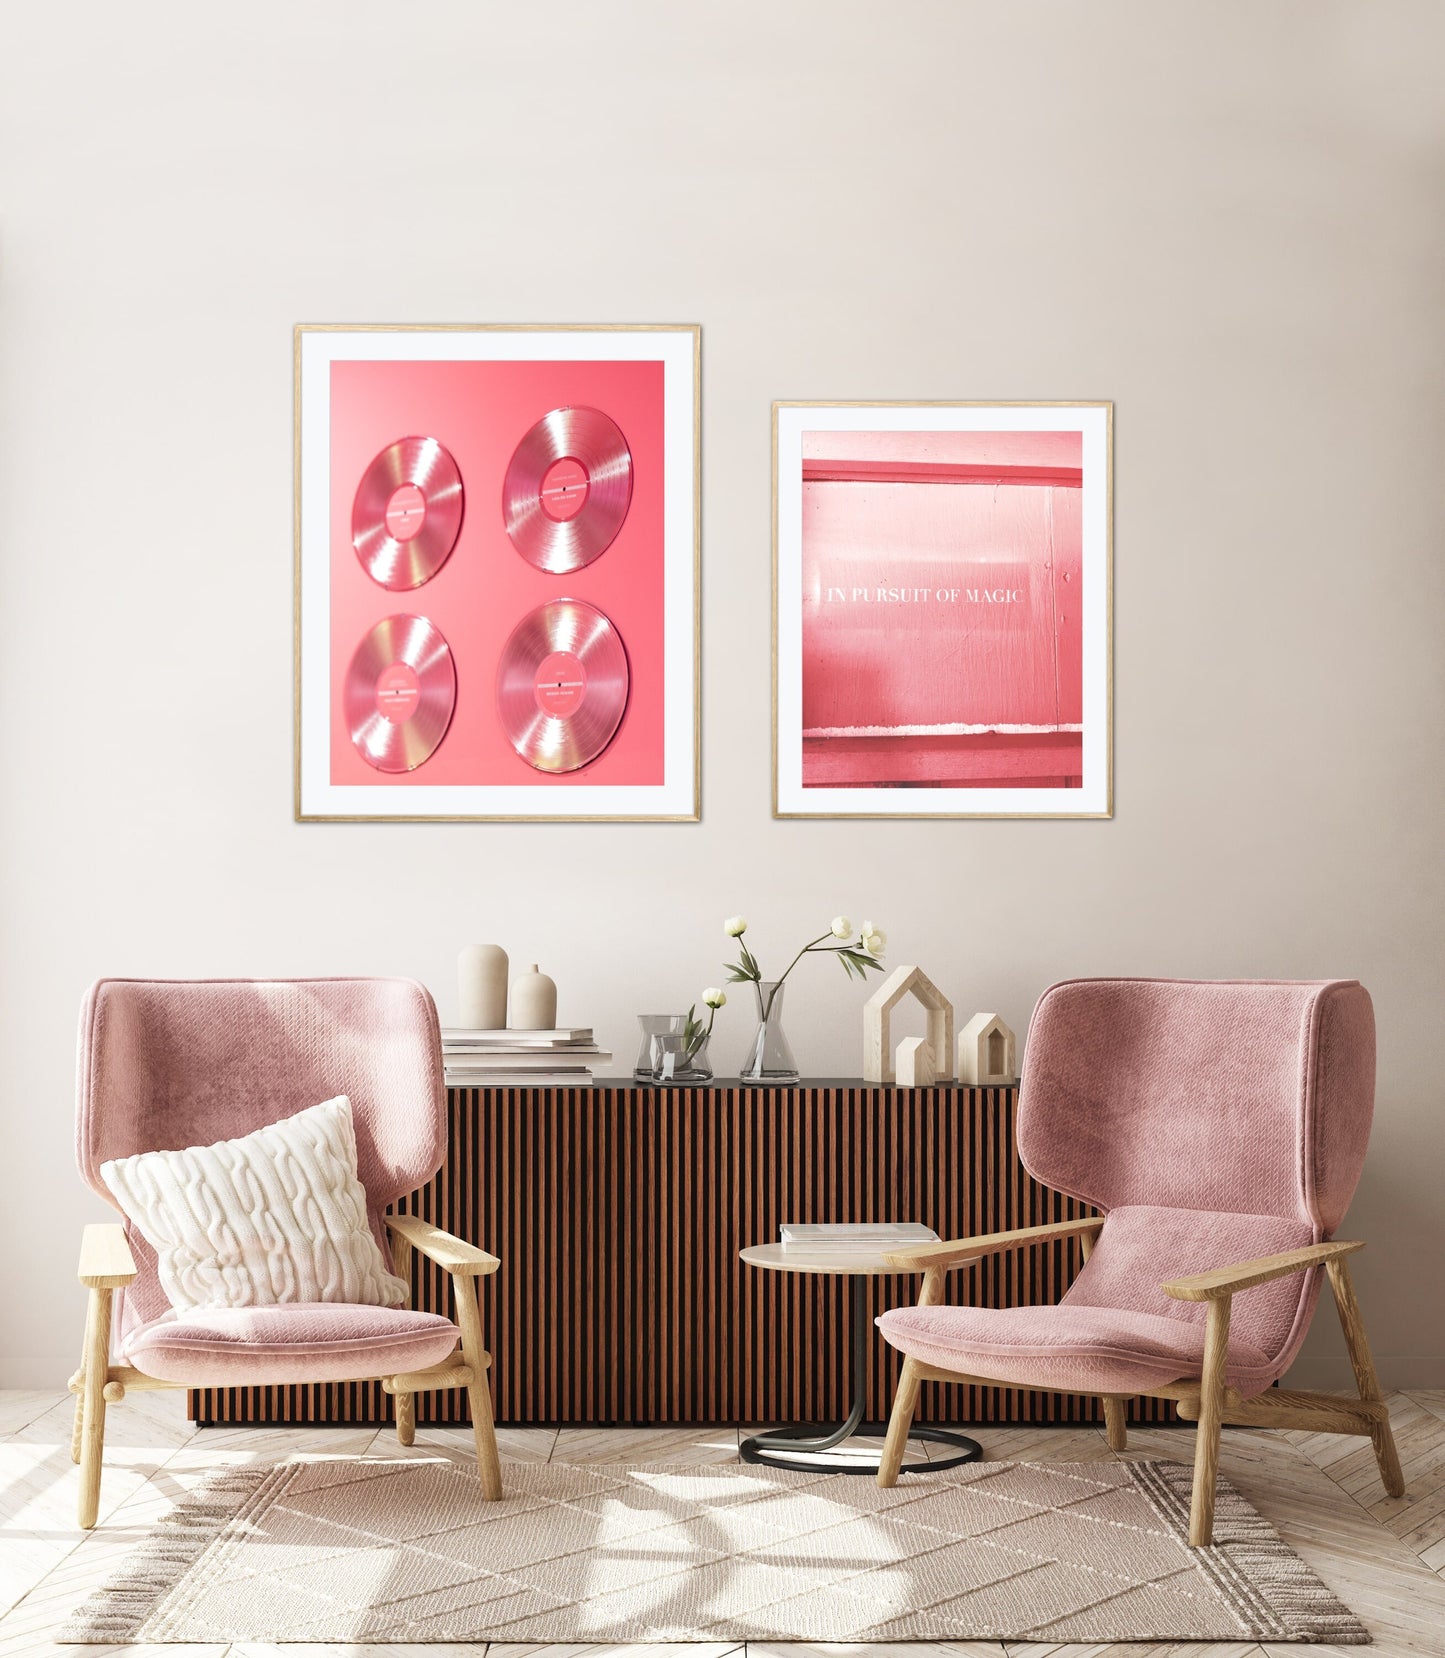 Set of three pink glam wall art DIGITAL PRINT, Light pink prints, Inspirational poster, Glam decor, Music poster, In pursuit of magic